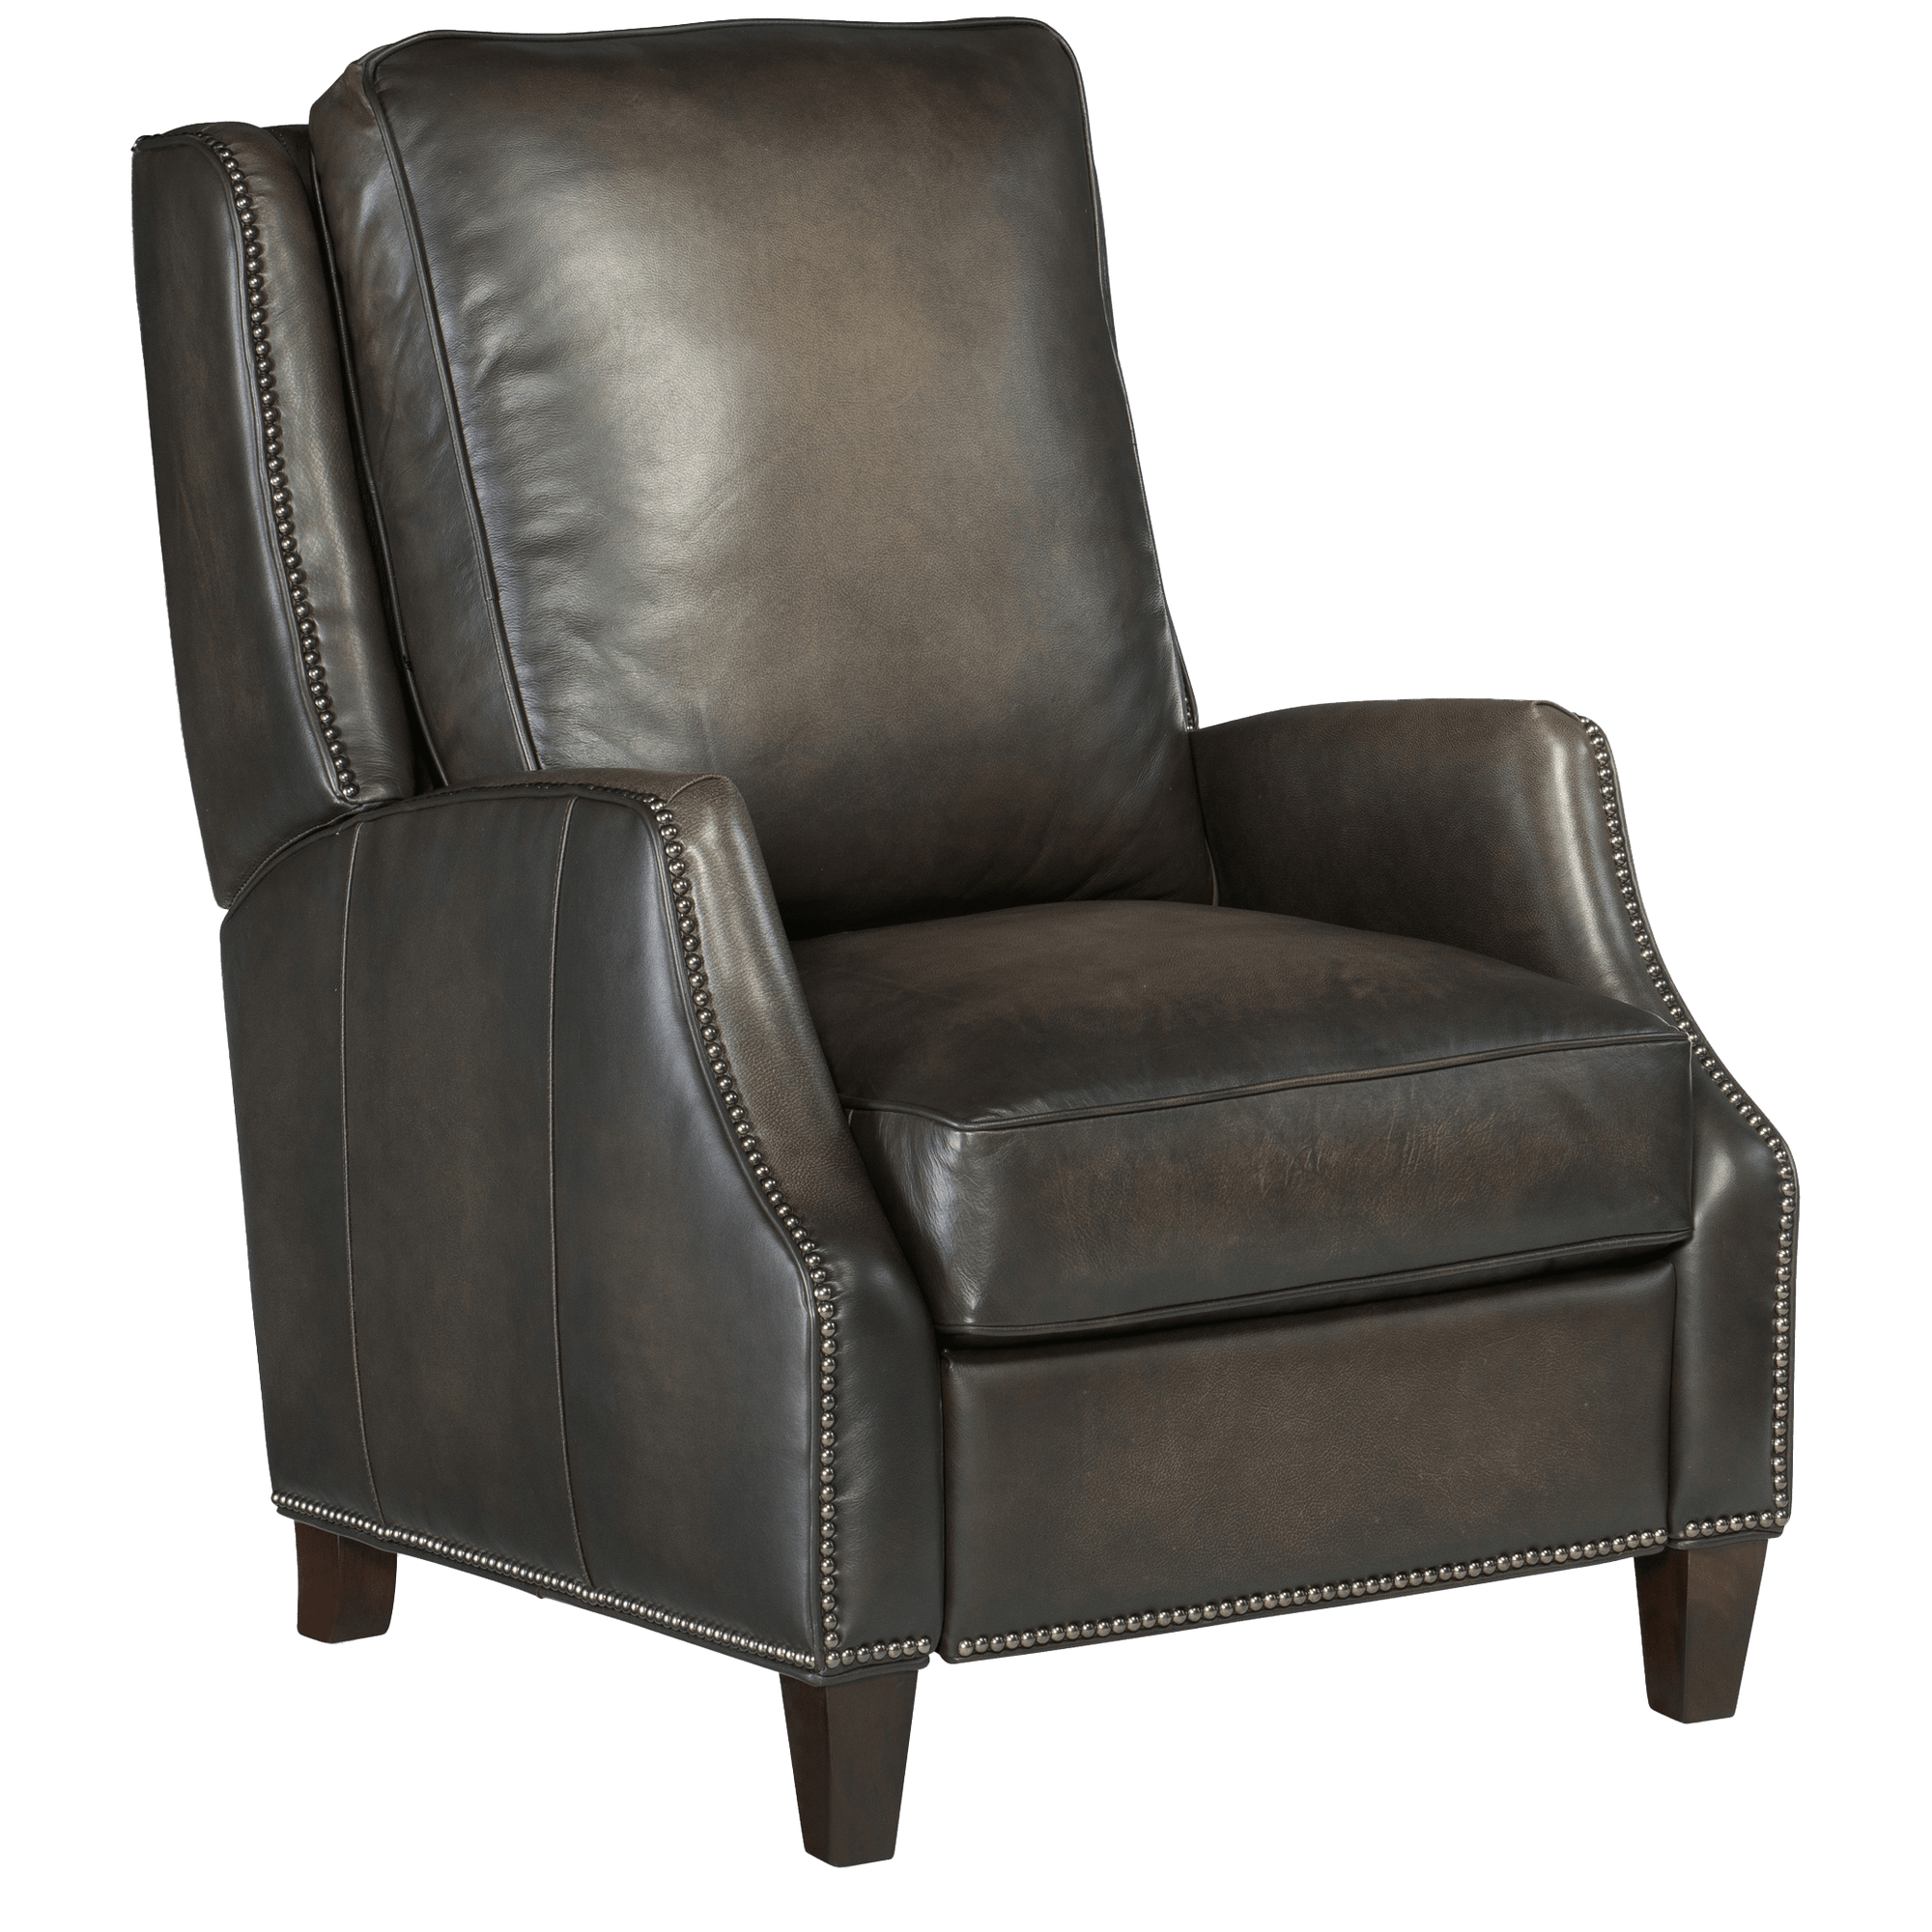 Elicce Manual Push Back Recliner, Leather